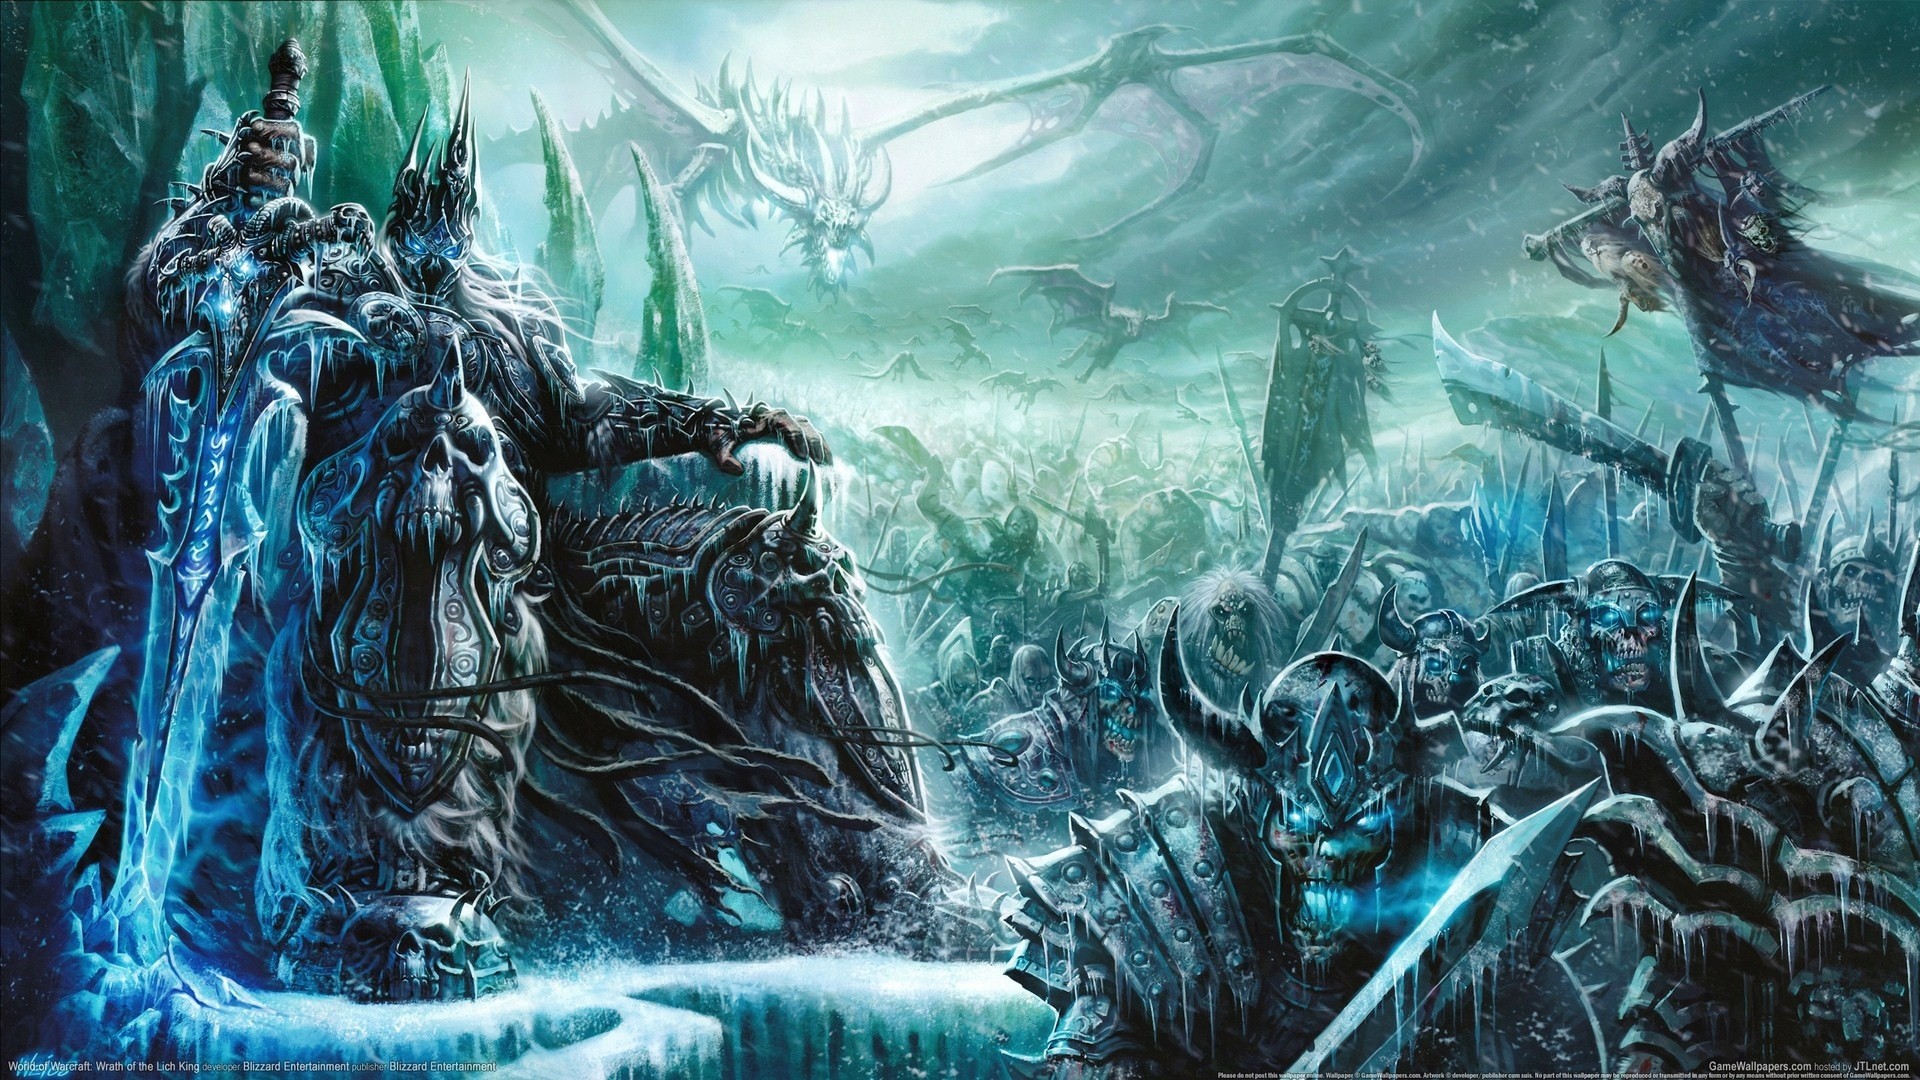 1920x1080 World of Warcraft: Wrath of the Lich King wallpaper,World HD .